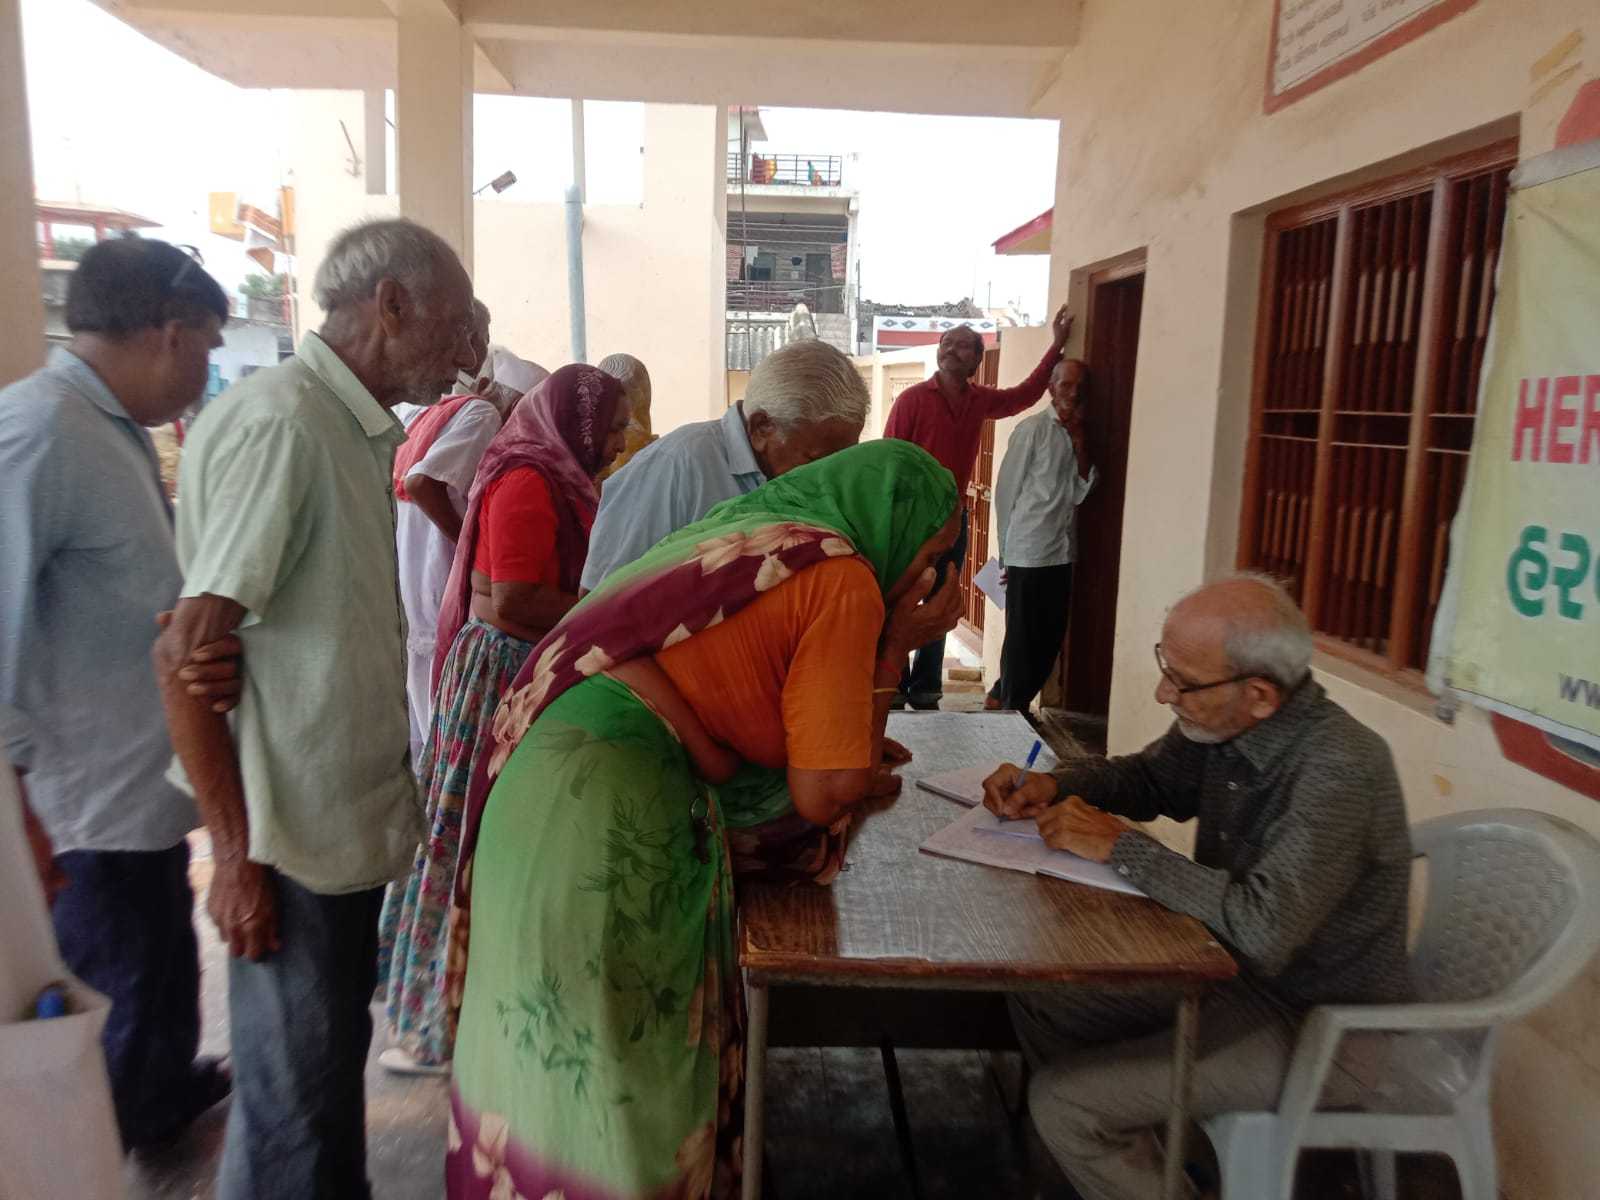 On  09.07.2024 Tuesday we had the most successful Eye and Dental care camp at a small Village  Gulabpura, taluka Manasa, Jilla Gandhinagar. 
In EYE CARE CAMP a total of 110 village people turn out for check-ups.(Male 59 female 51) Of which 38 senior citizens (Male 21 female 17 ) We have distributed 92 spectacles to needy villagers. 13 village people have cataracts and were advised to get an operation at a nearby hospital. 
We express thanks Dr Chandrakant Patel and Dr Kirtibhai Patel for their service and valuable time
In THE DENTAL SECTION, 86 villagers turned up for check (Males 52 Female 34) of which 22 senior citizens (Males 13 Female 9).  The students of the village school were taught how to brush their teeth.
We thank the Team of Bopal Dental College for their valuable service.
We appreciate the efforts of Mrs Anitaben of SEWA Gandhinagar for introducing us to this village, providing all the necessary arrangements, and helping us to bring smiles to the faces of the villagers.